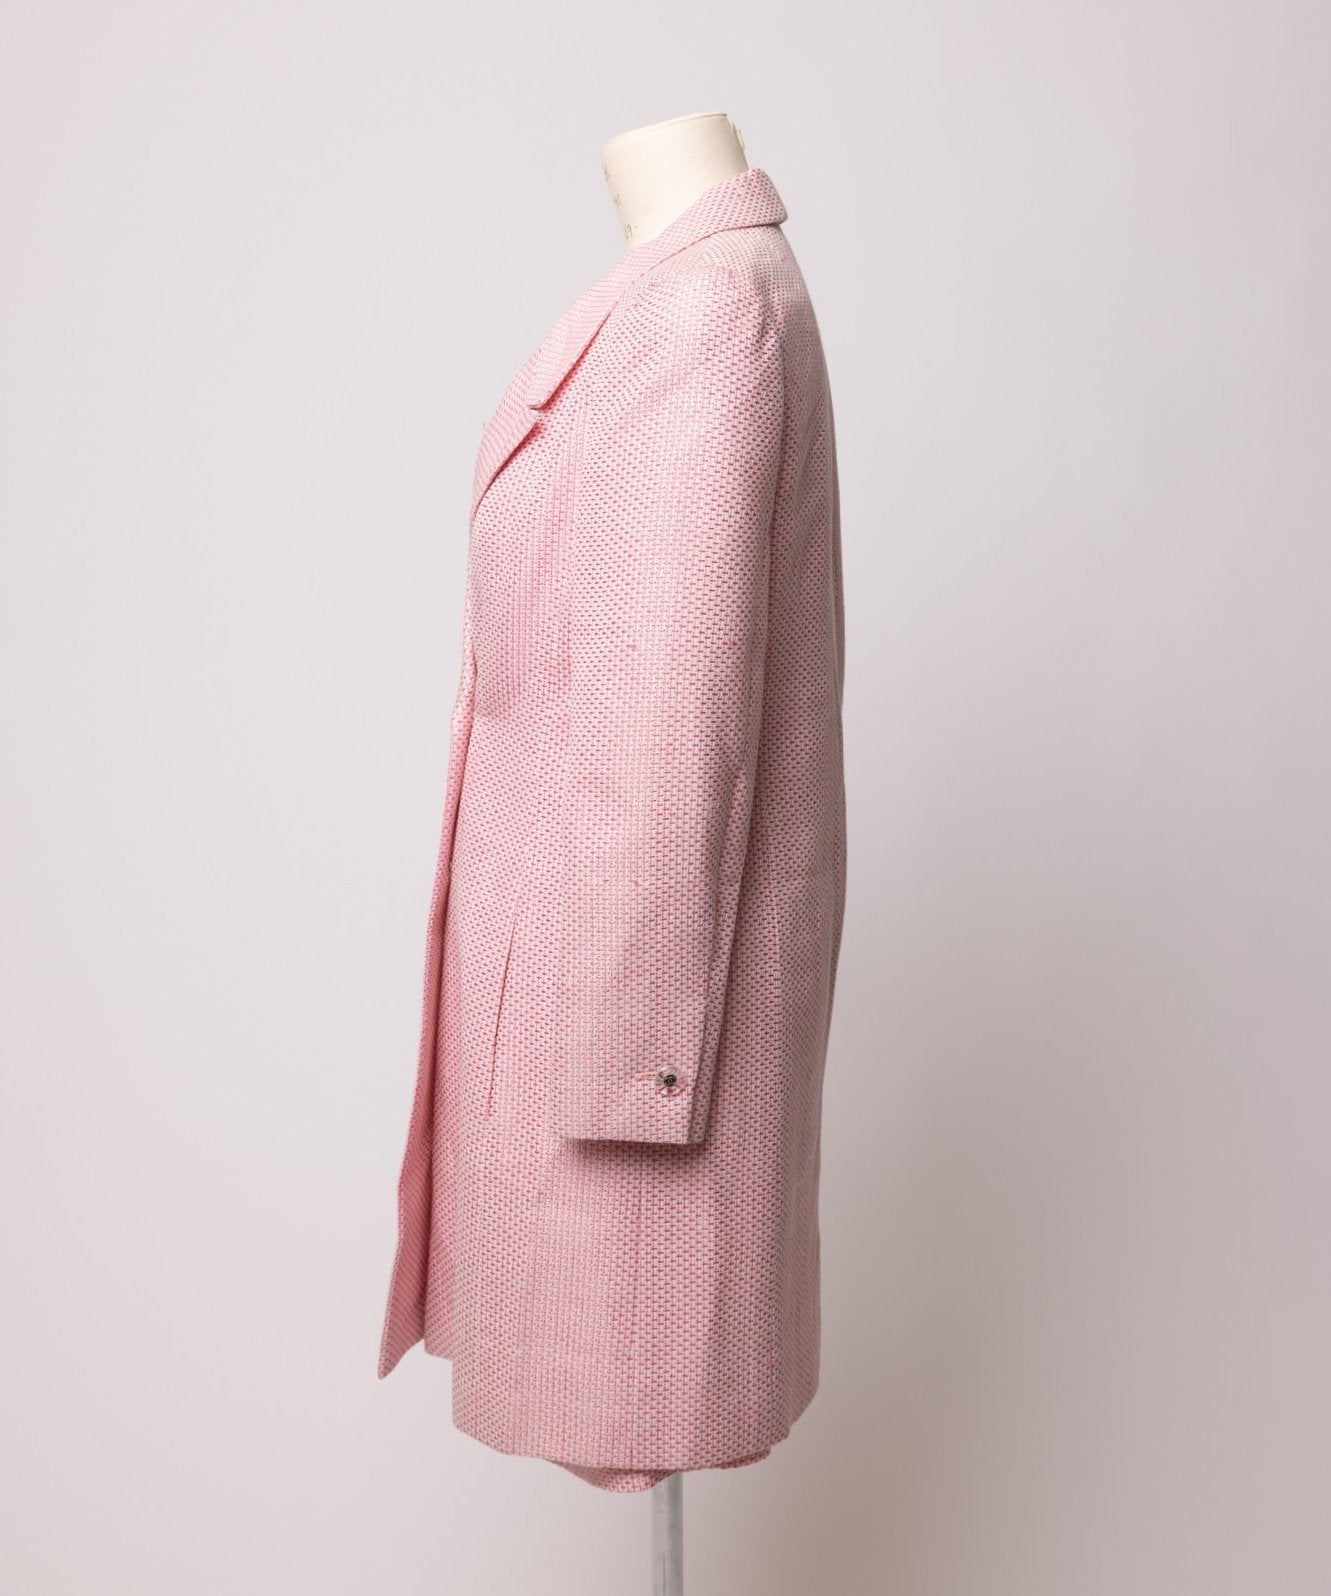 CHANEL white and pink cotton HOUNDSTOOTH Tweed Jacket 38 S